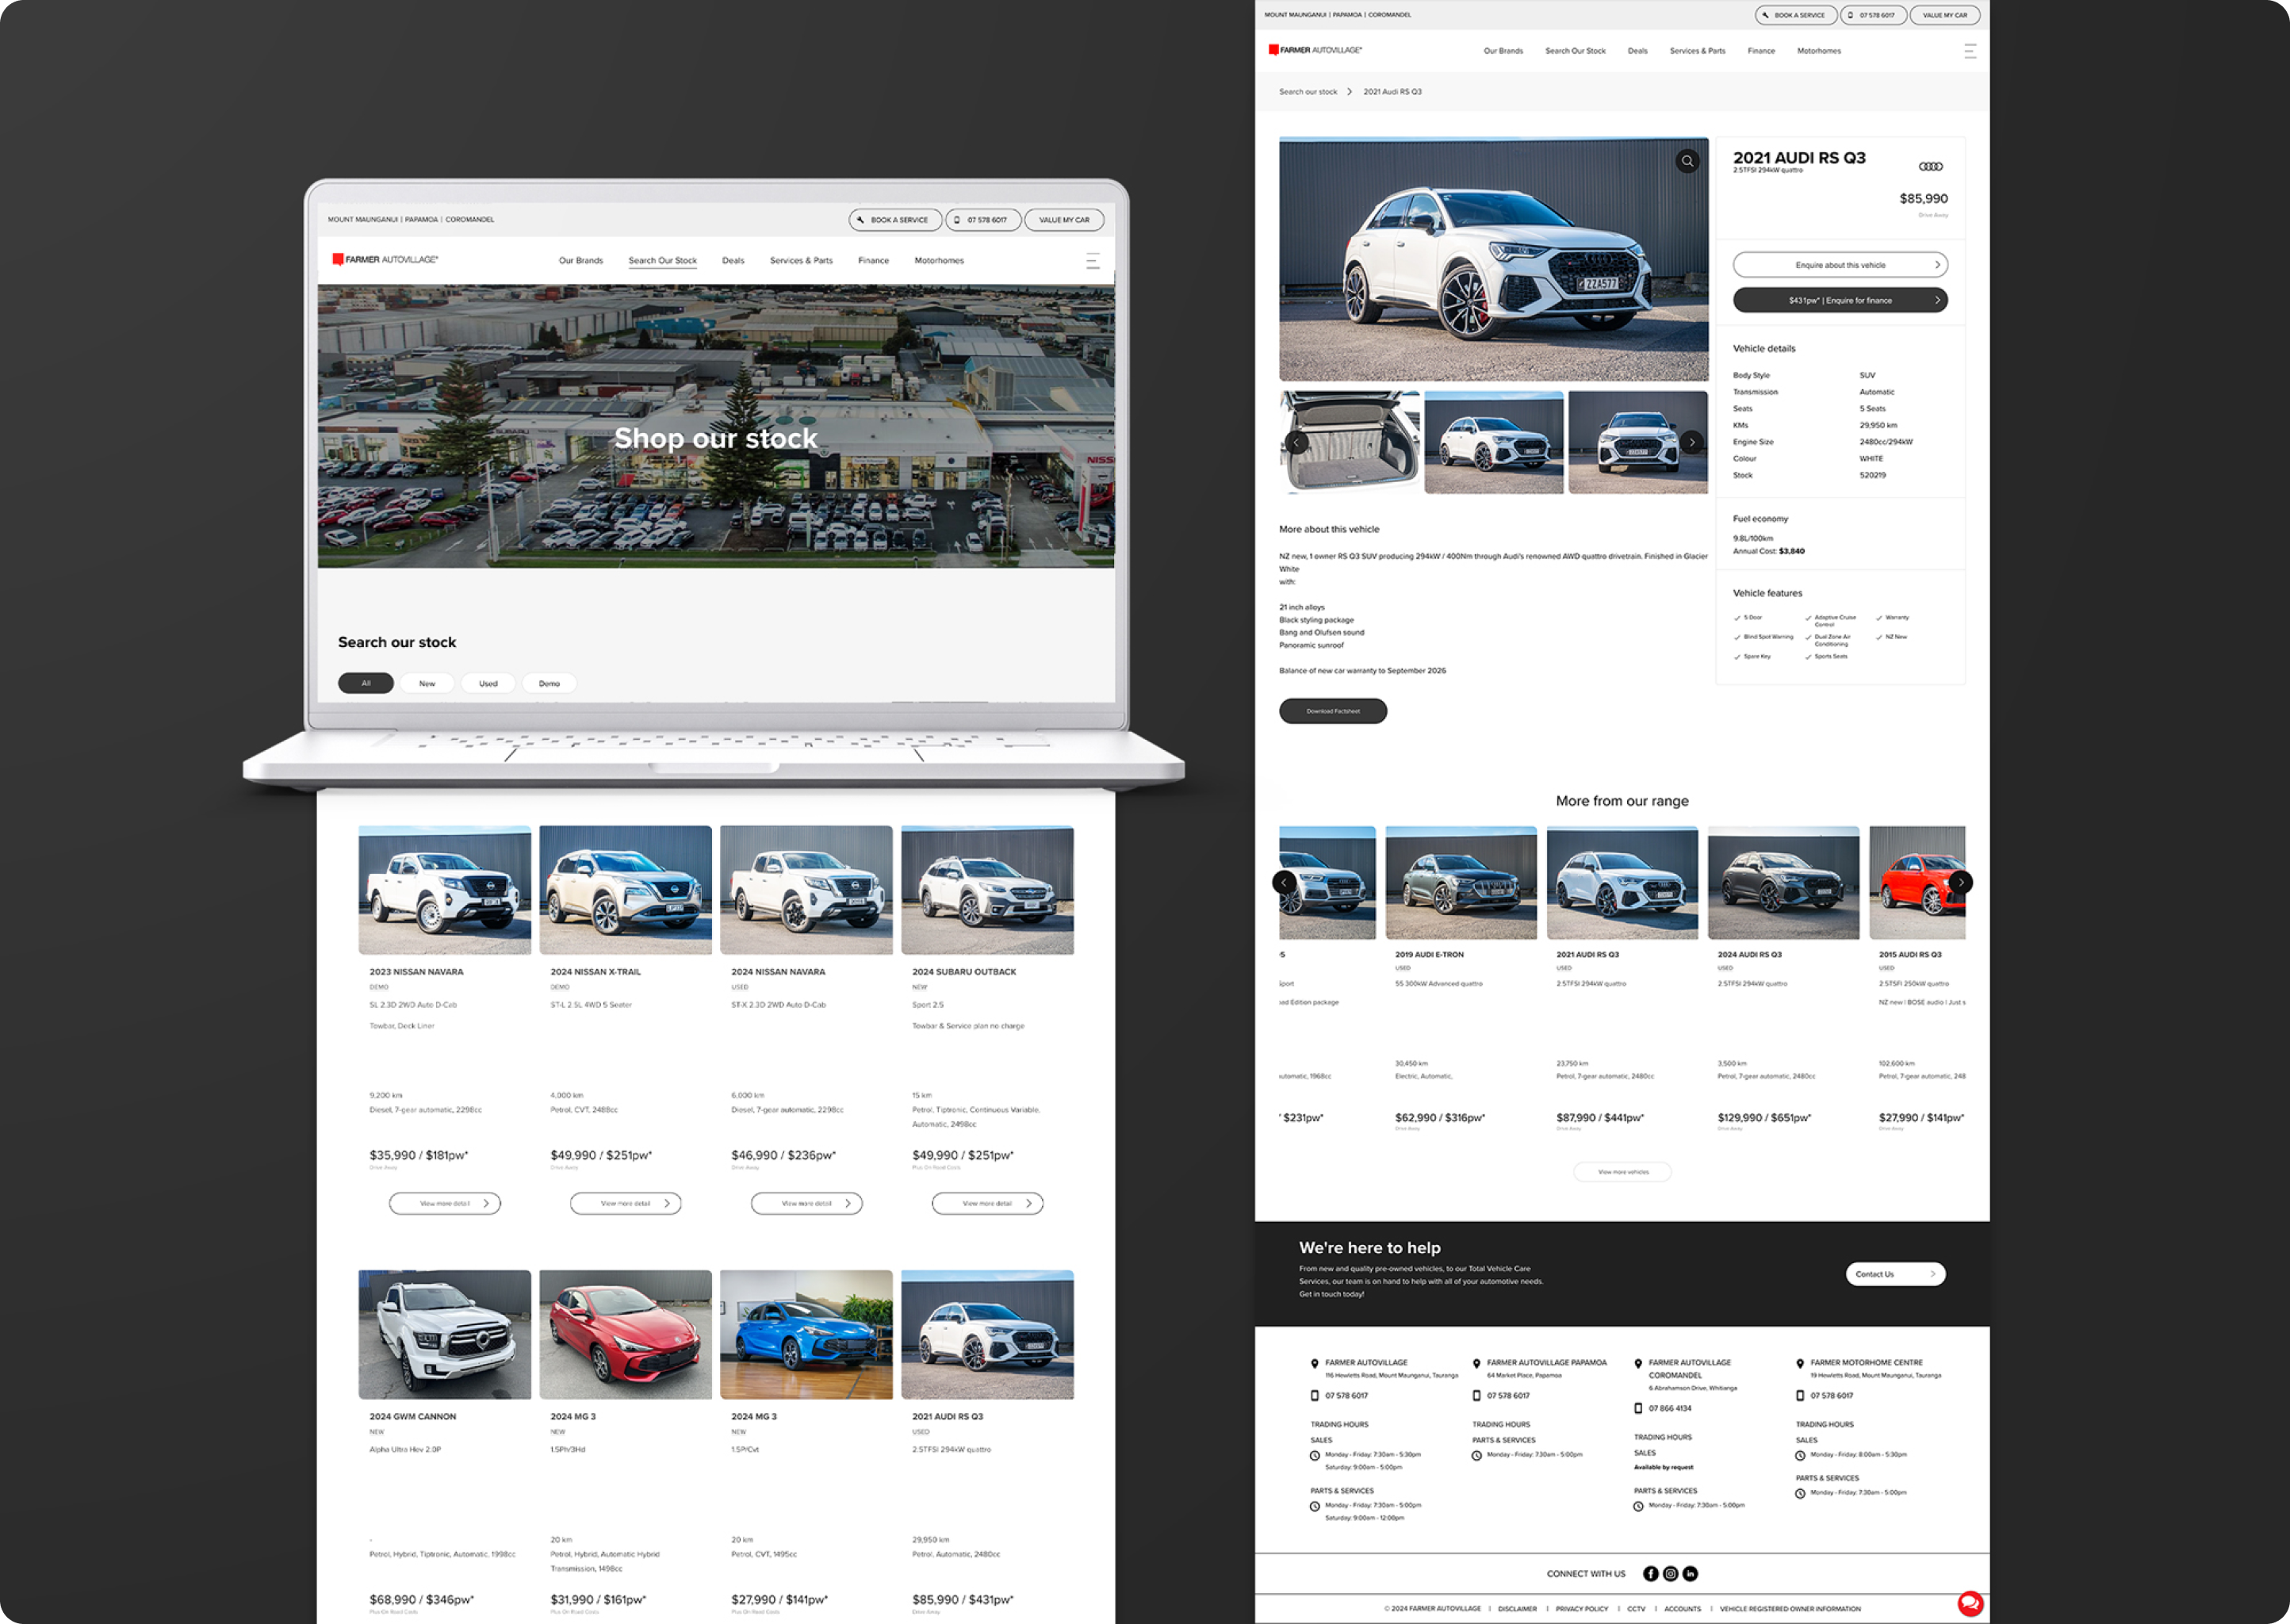 Webpages display multiple car listings demonstrating how easy the site is for employees to update.